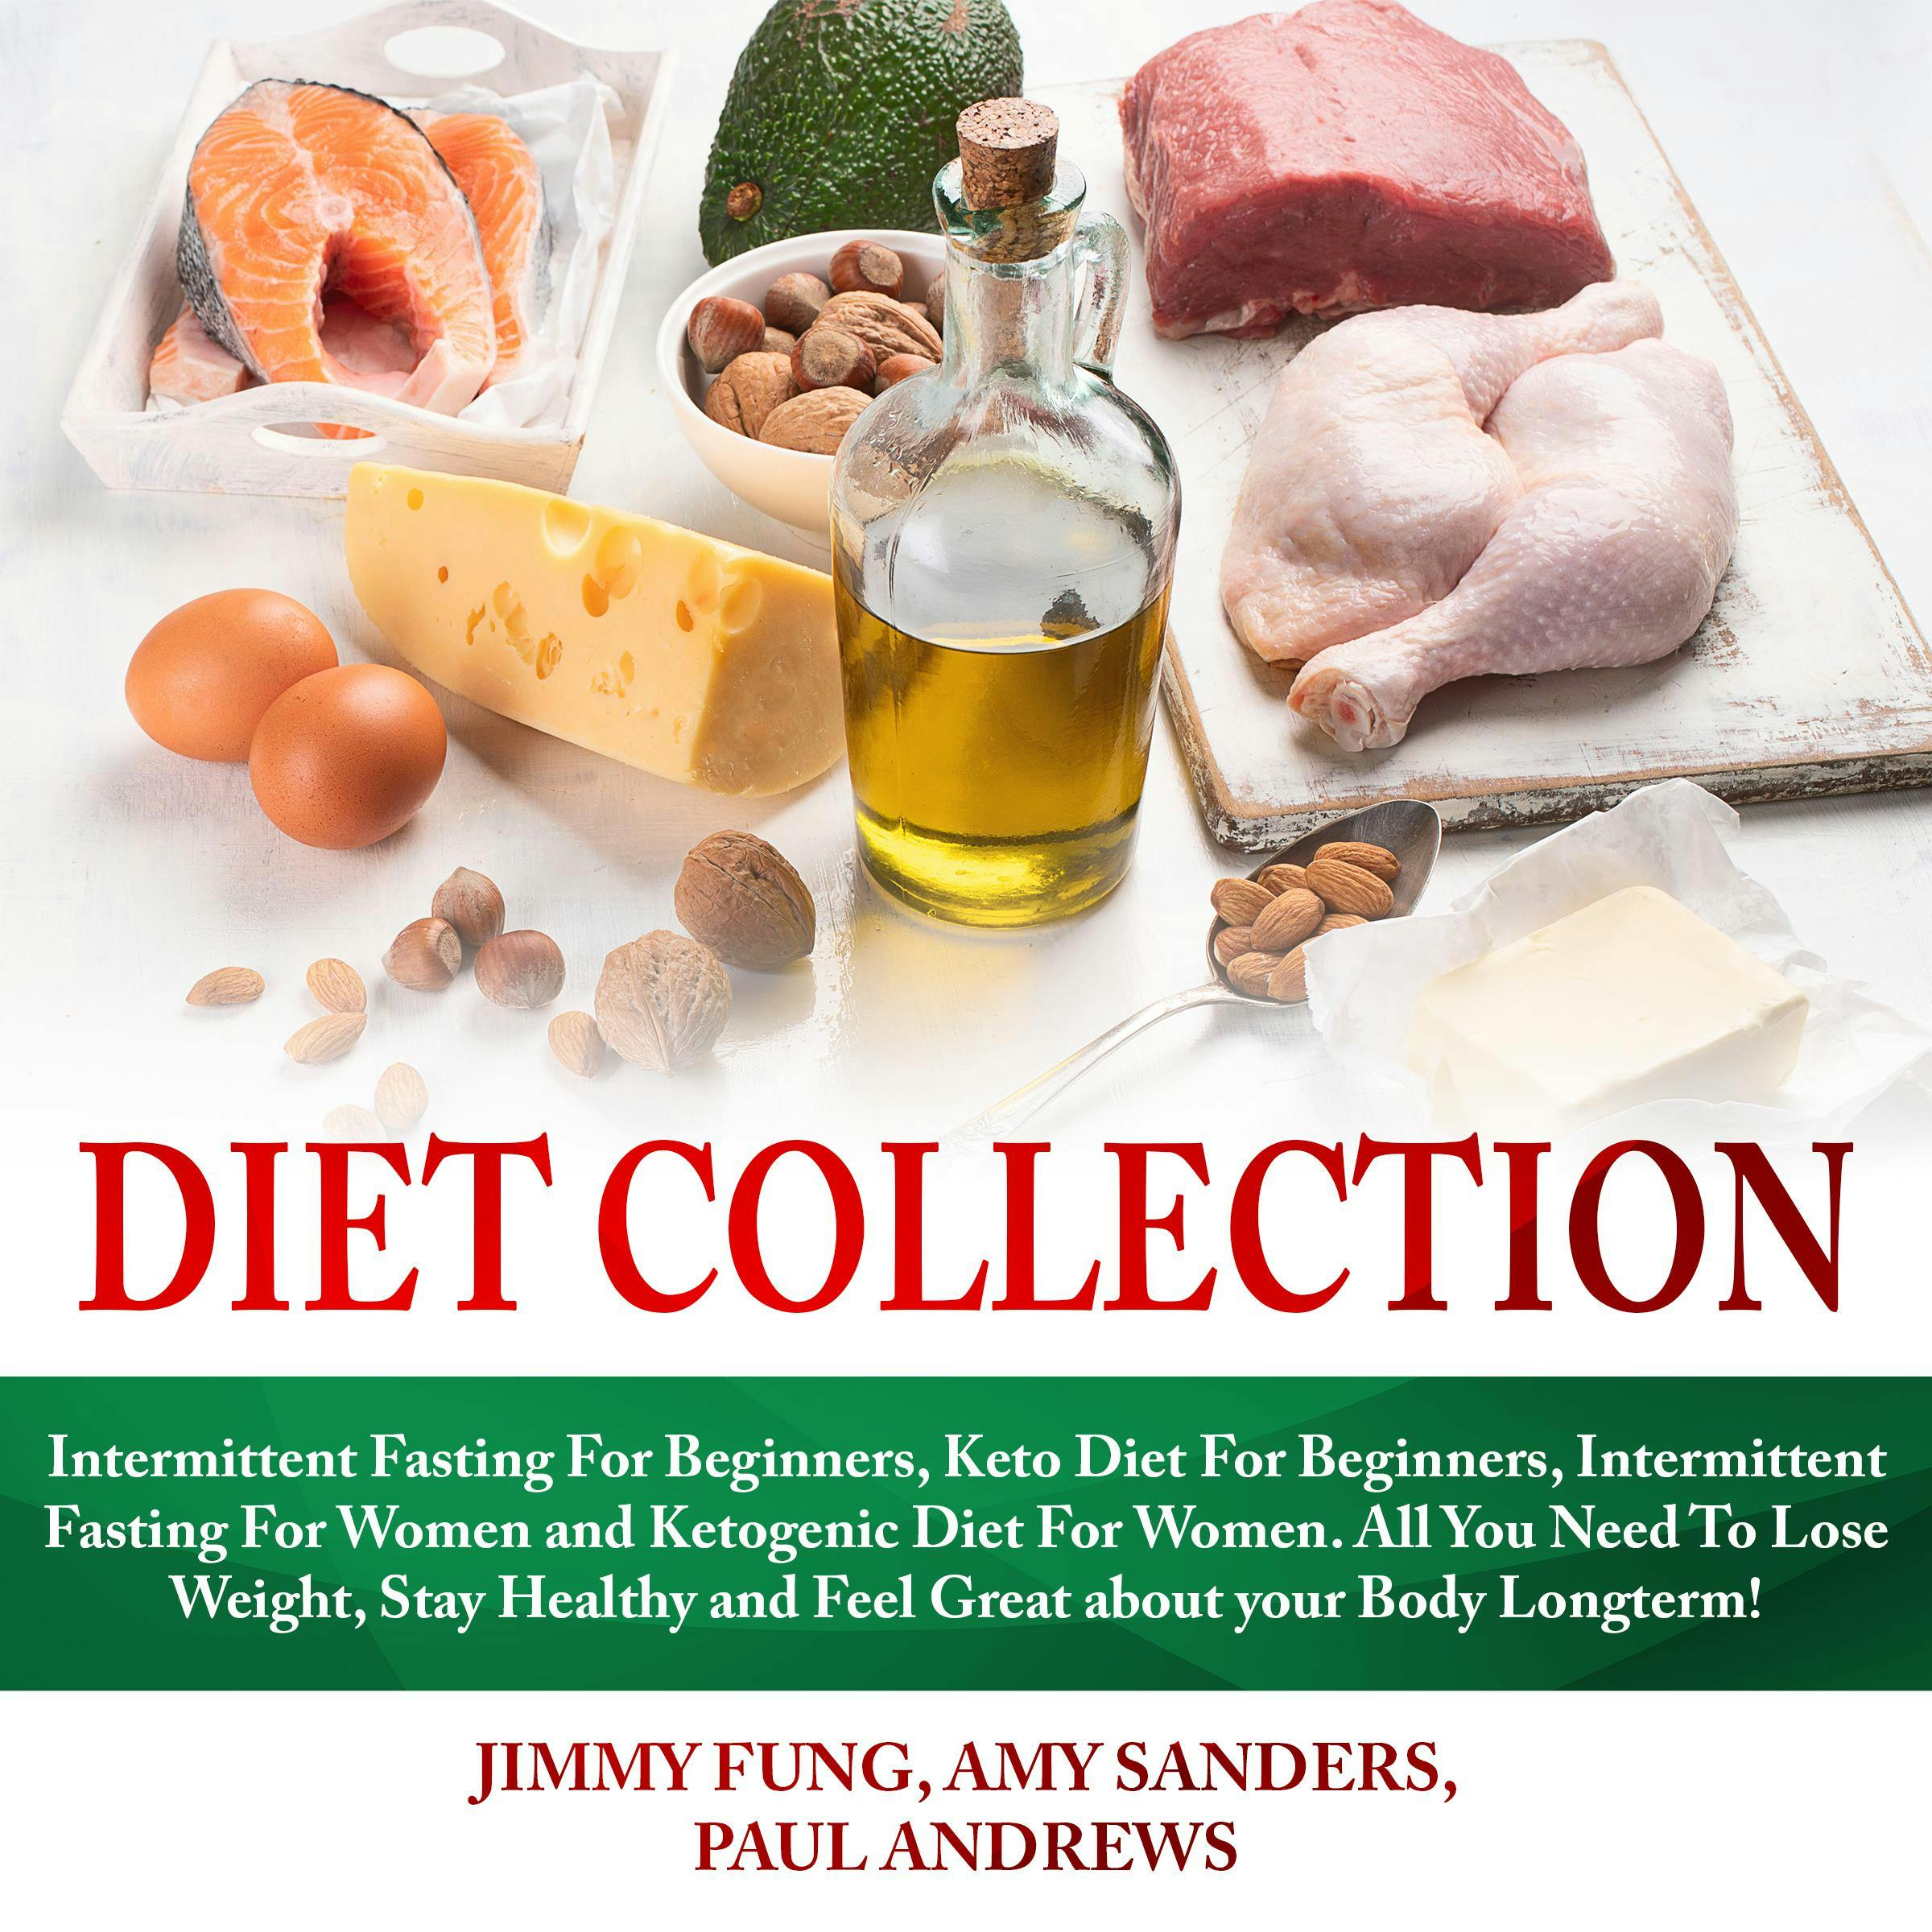 Diet Collection: Intermittent Fasting For Beginners, Keto Diet For Beginners, Intermittent Fasting For Women and Ketogenic Diet For Women. All You Need To Lose Weight, Stay Healthy and Feel Great about your Body Longterm! - Amy Sanders, Jimmy Fung, Paul Andrews